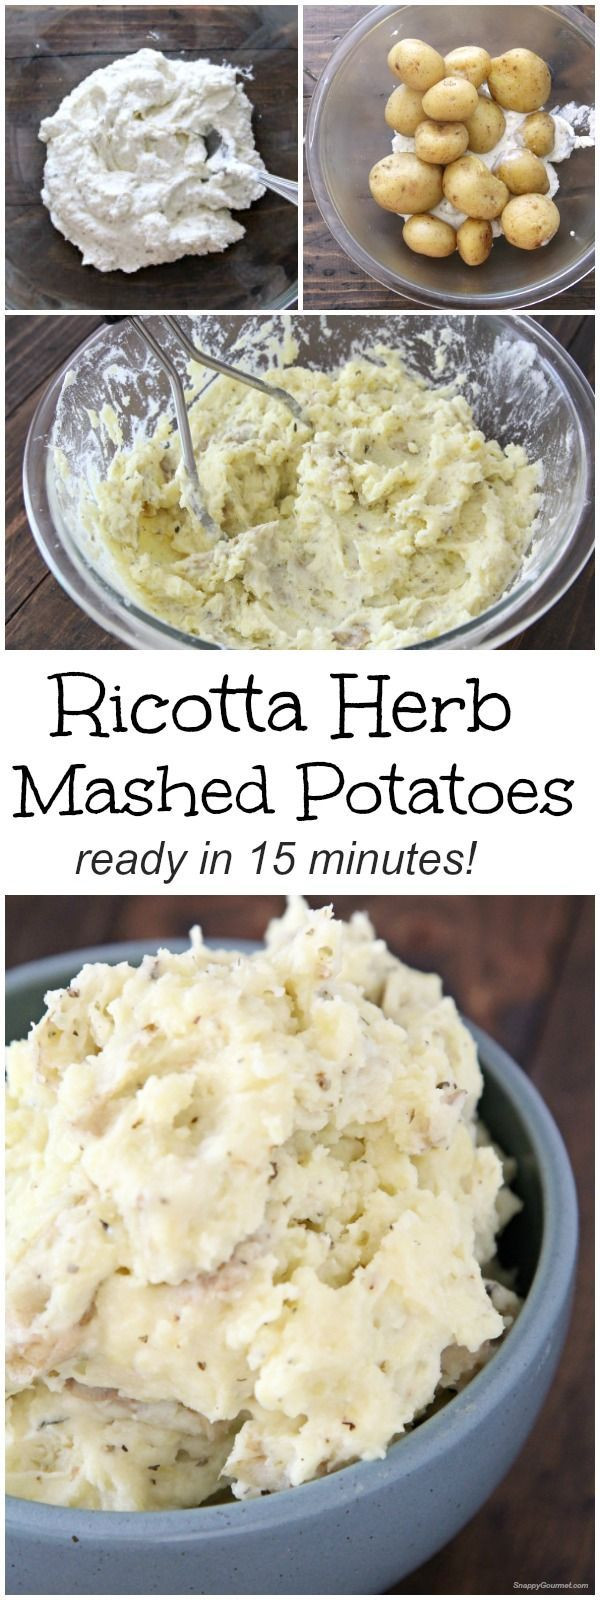 Is Mashed Potatoes Good For Weight Loss
 1000 ideas about Diet Plans on Pinterest